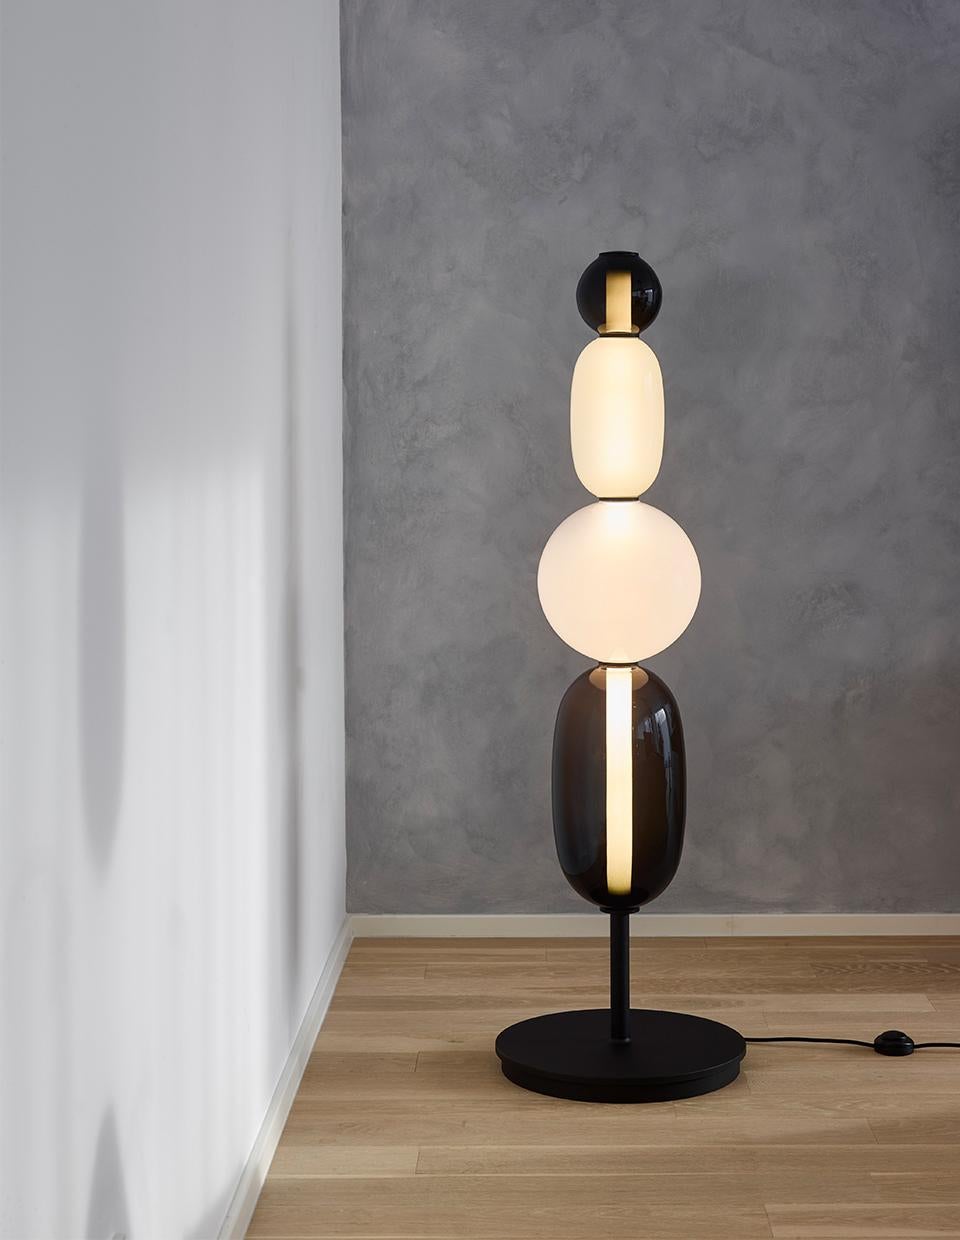 Contemporary Blown Crystal Glass Floor Lamp - Pebbles by Boris Klimek for Bomma In New Condition For Sale In Warsaw, PL